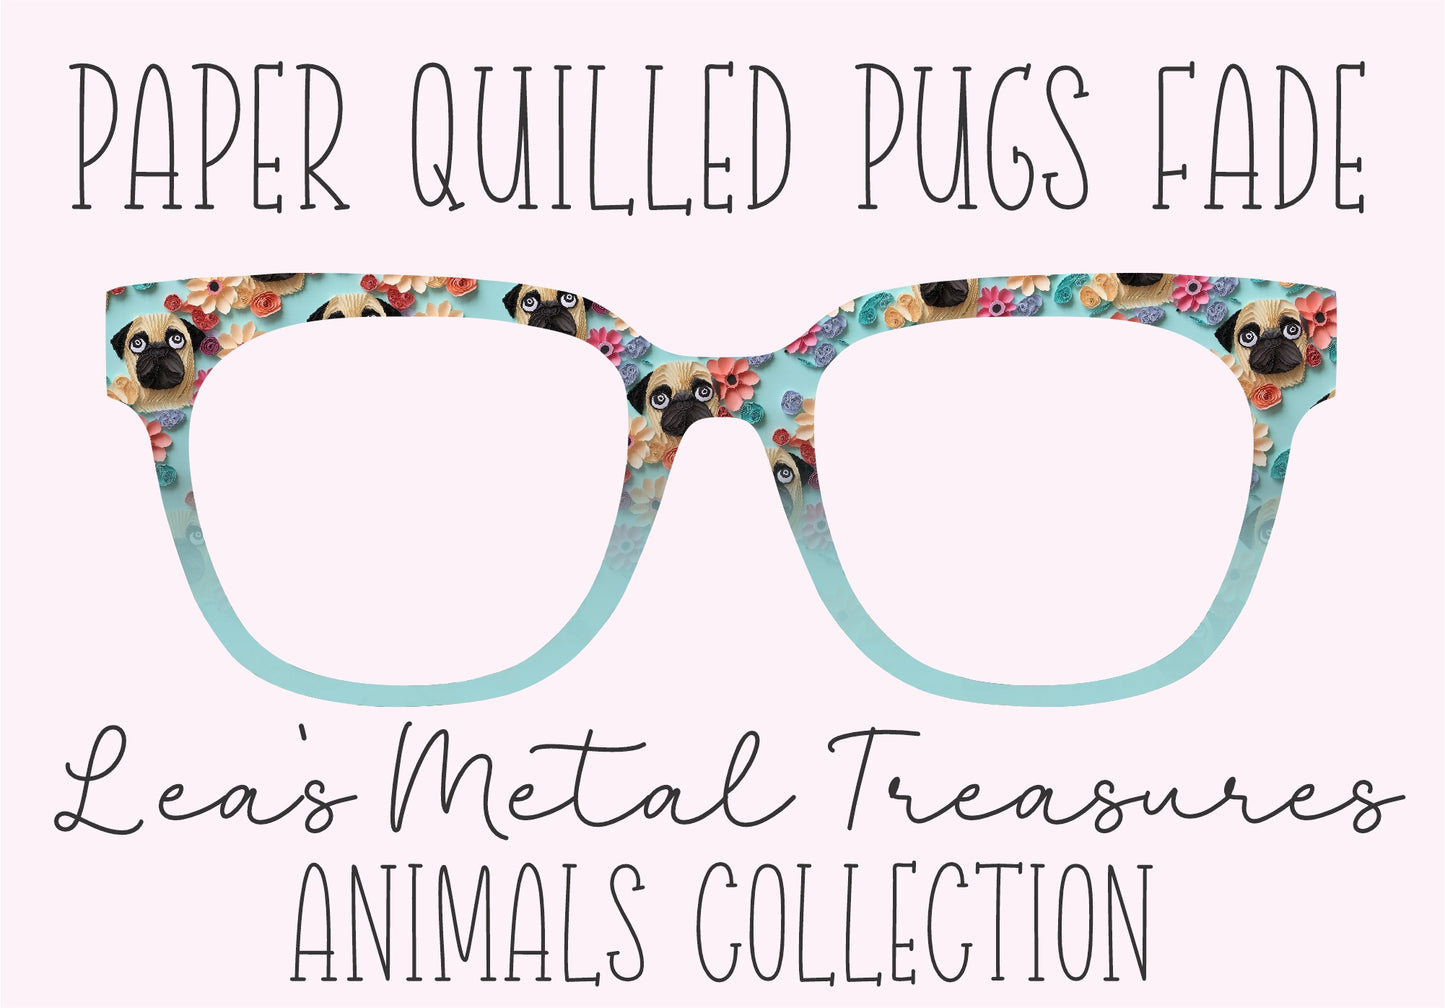 Paper Quilled Pugs Fade